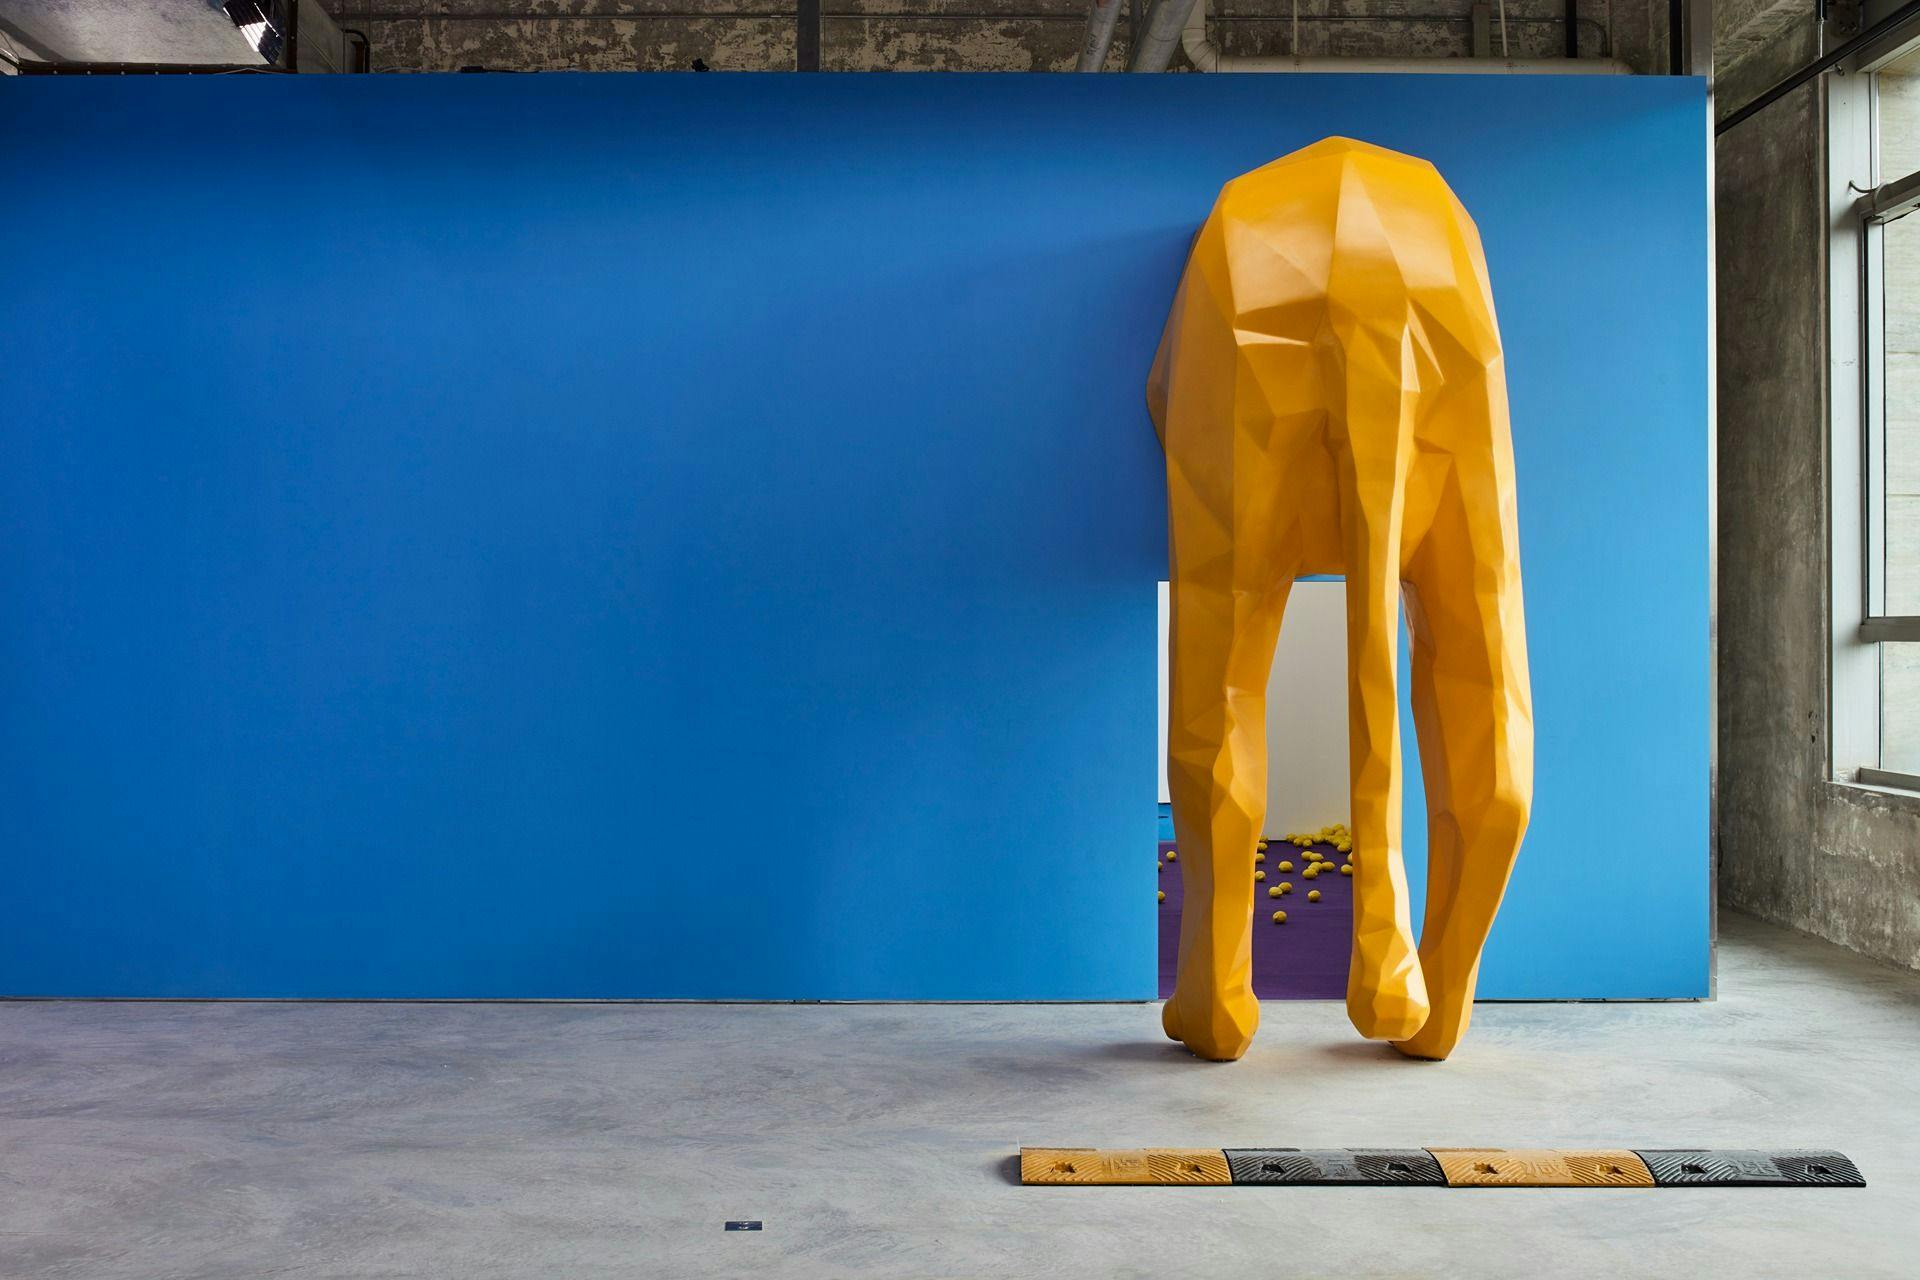 An installation view of Installation view, Samson Young, The highway is like a lion's mouth, 6 November - 23 December 2018, Edouard Malingue Gallery, Shanghai. We see a blue wall with a door way. We can see the back side of a giant yellow lion. People need to walk under the lion to enter the room behind